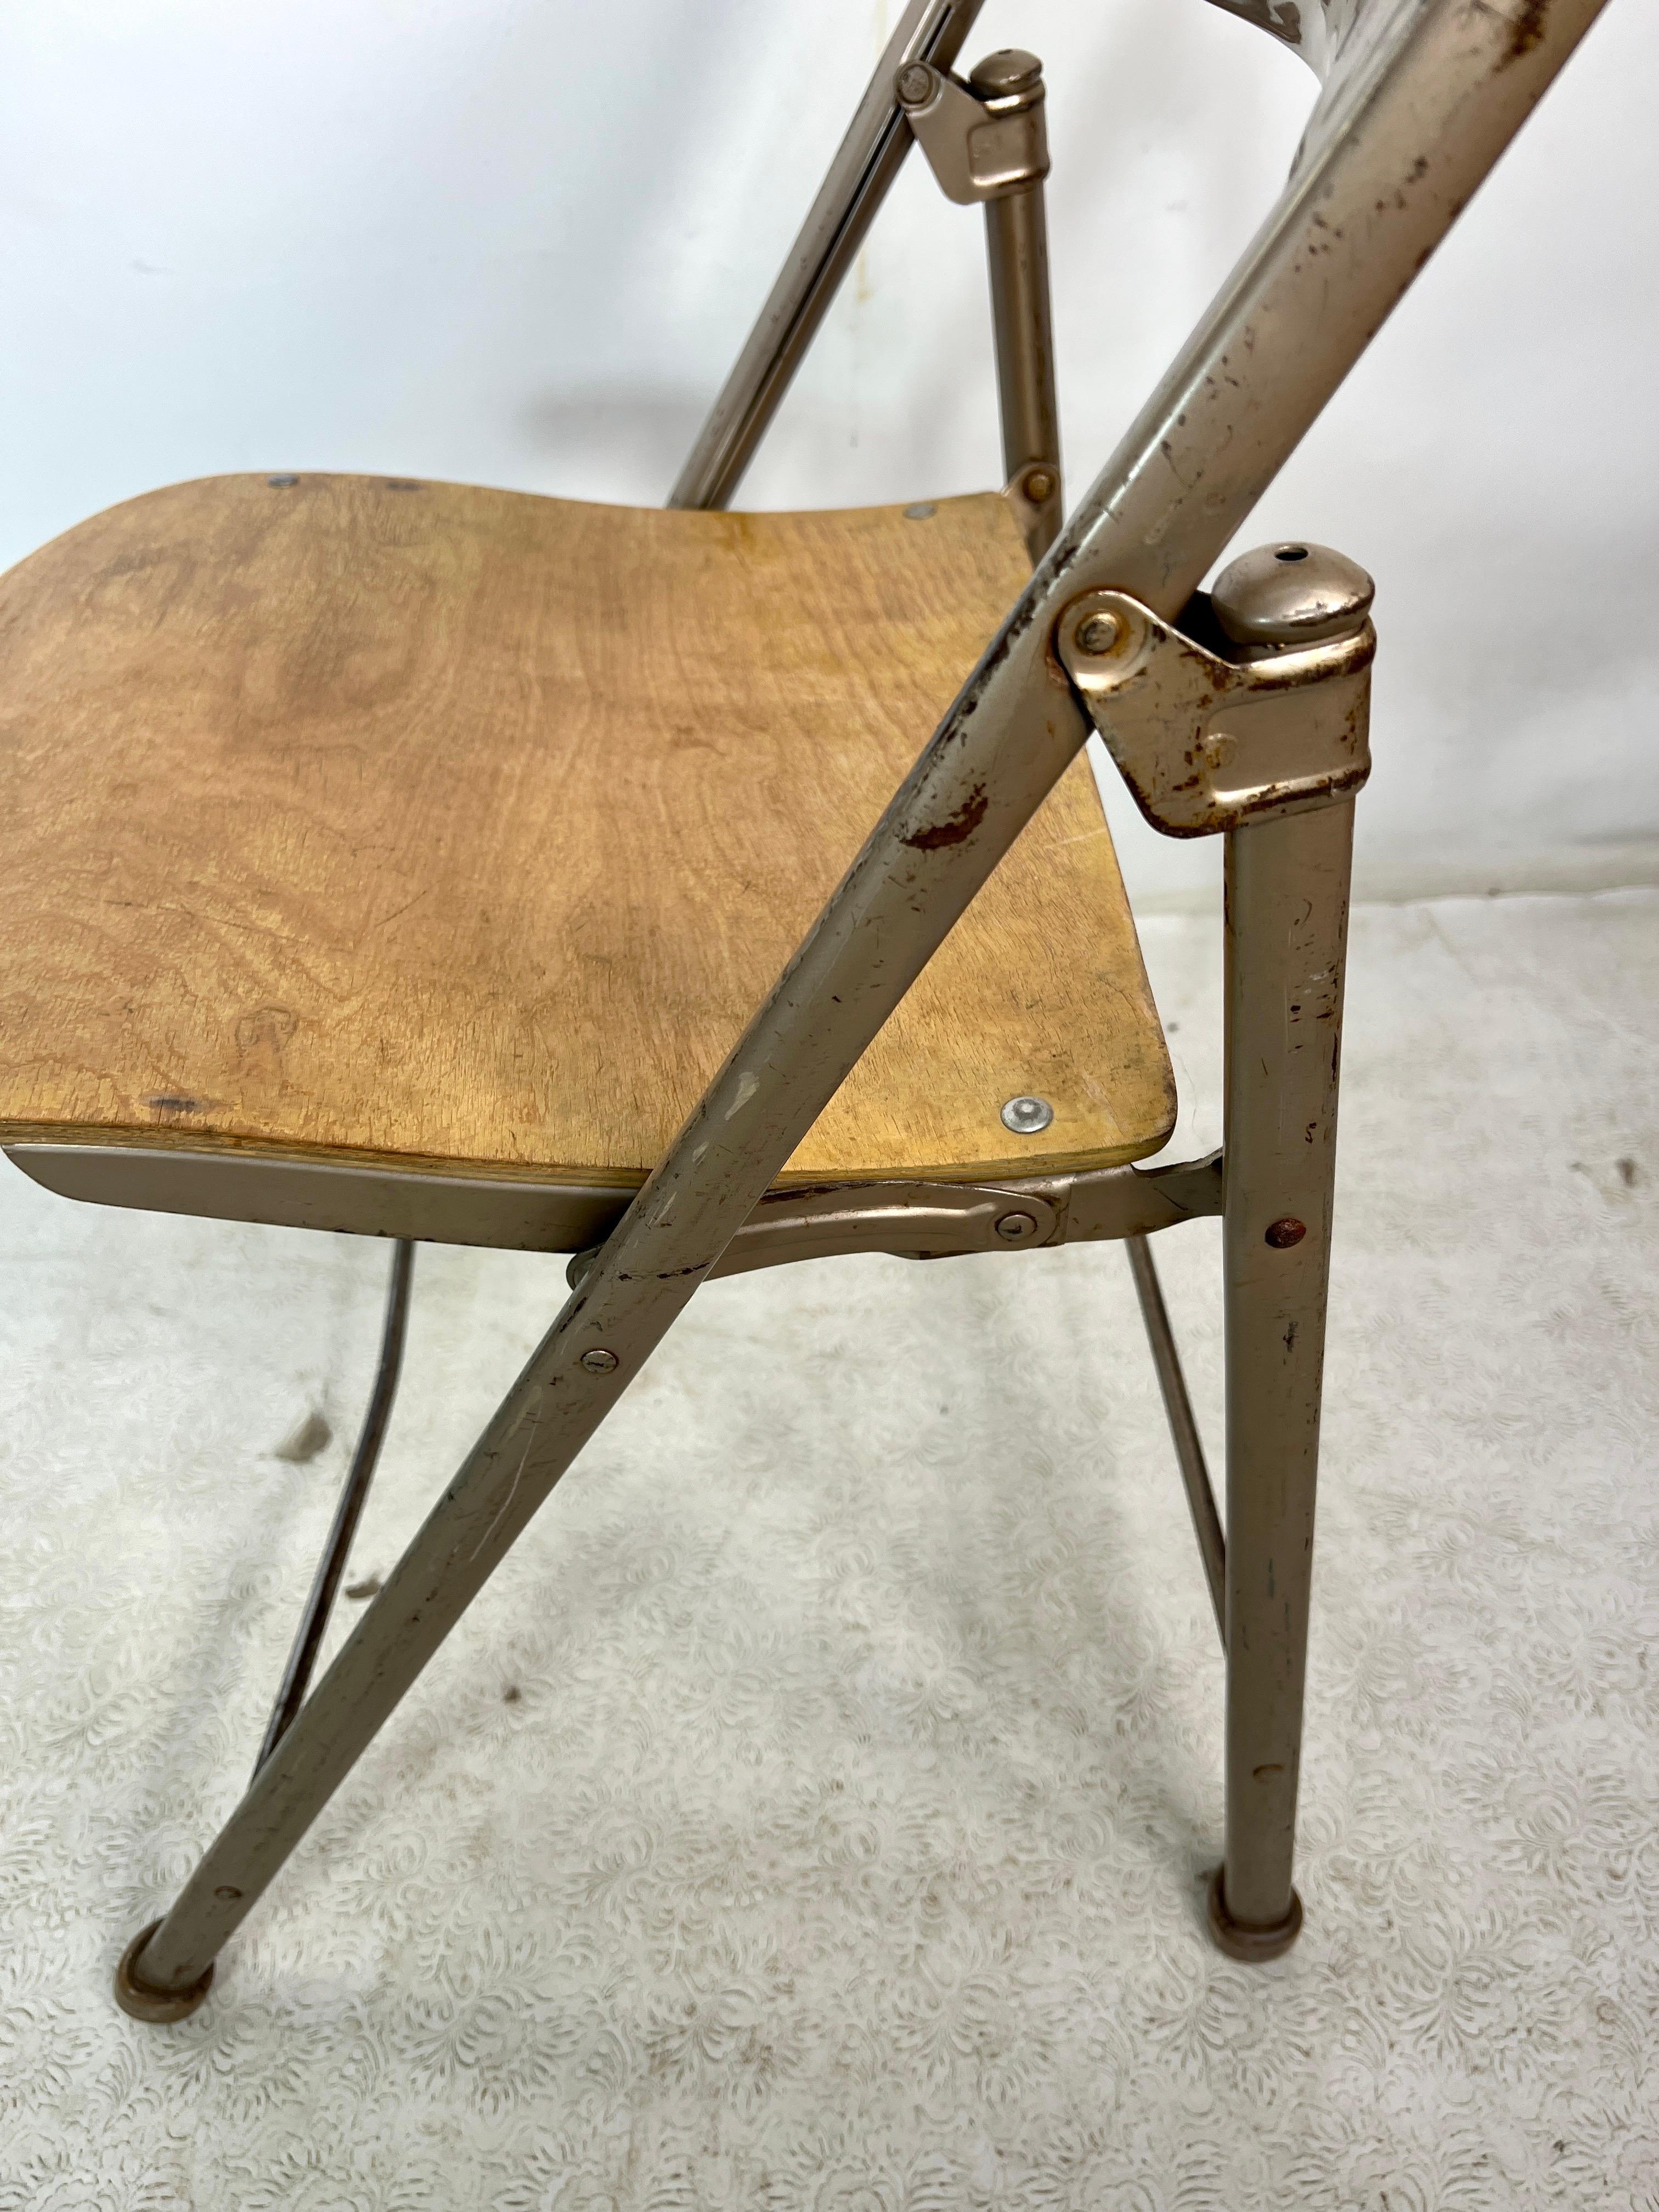 Mid-20th Century Midcentury American Seating Metal Folding Chair Curved Plywood Seat For Sale